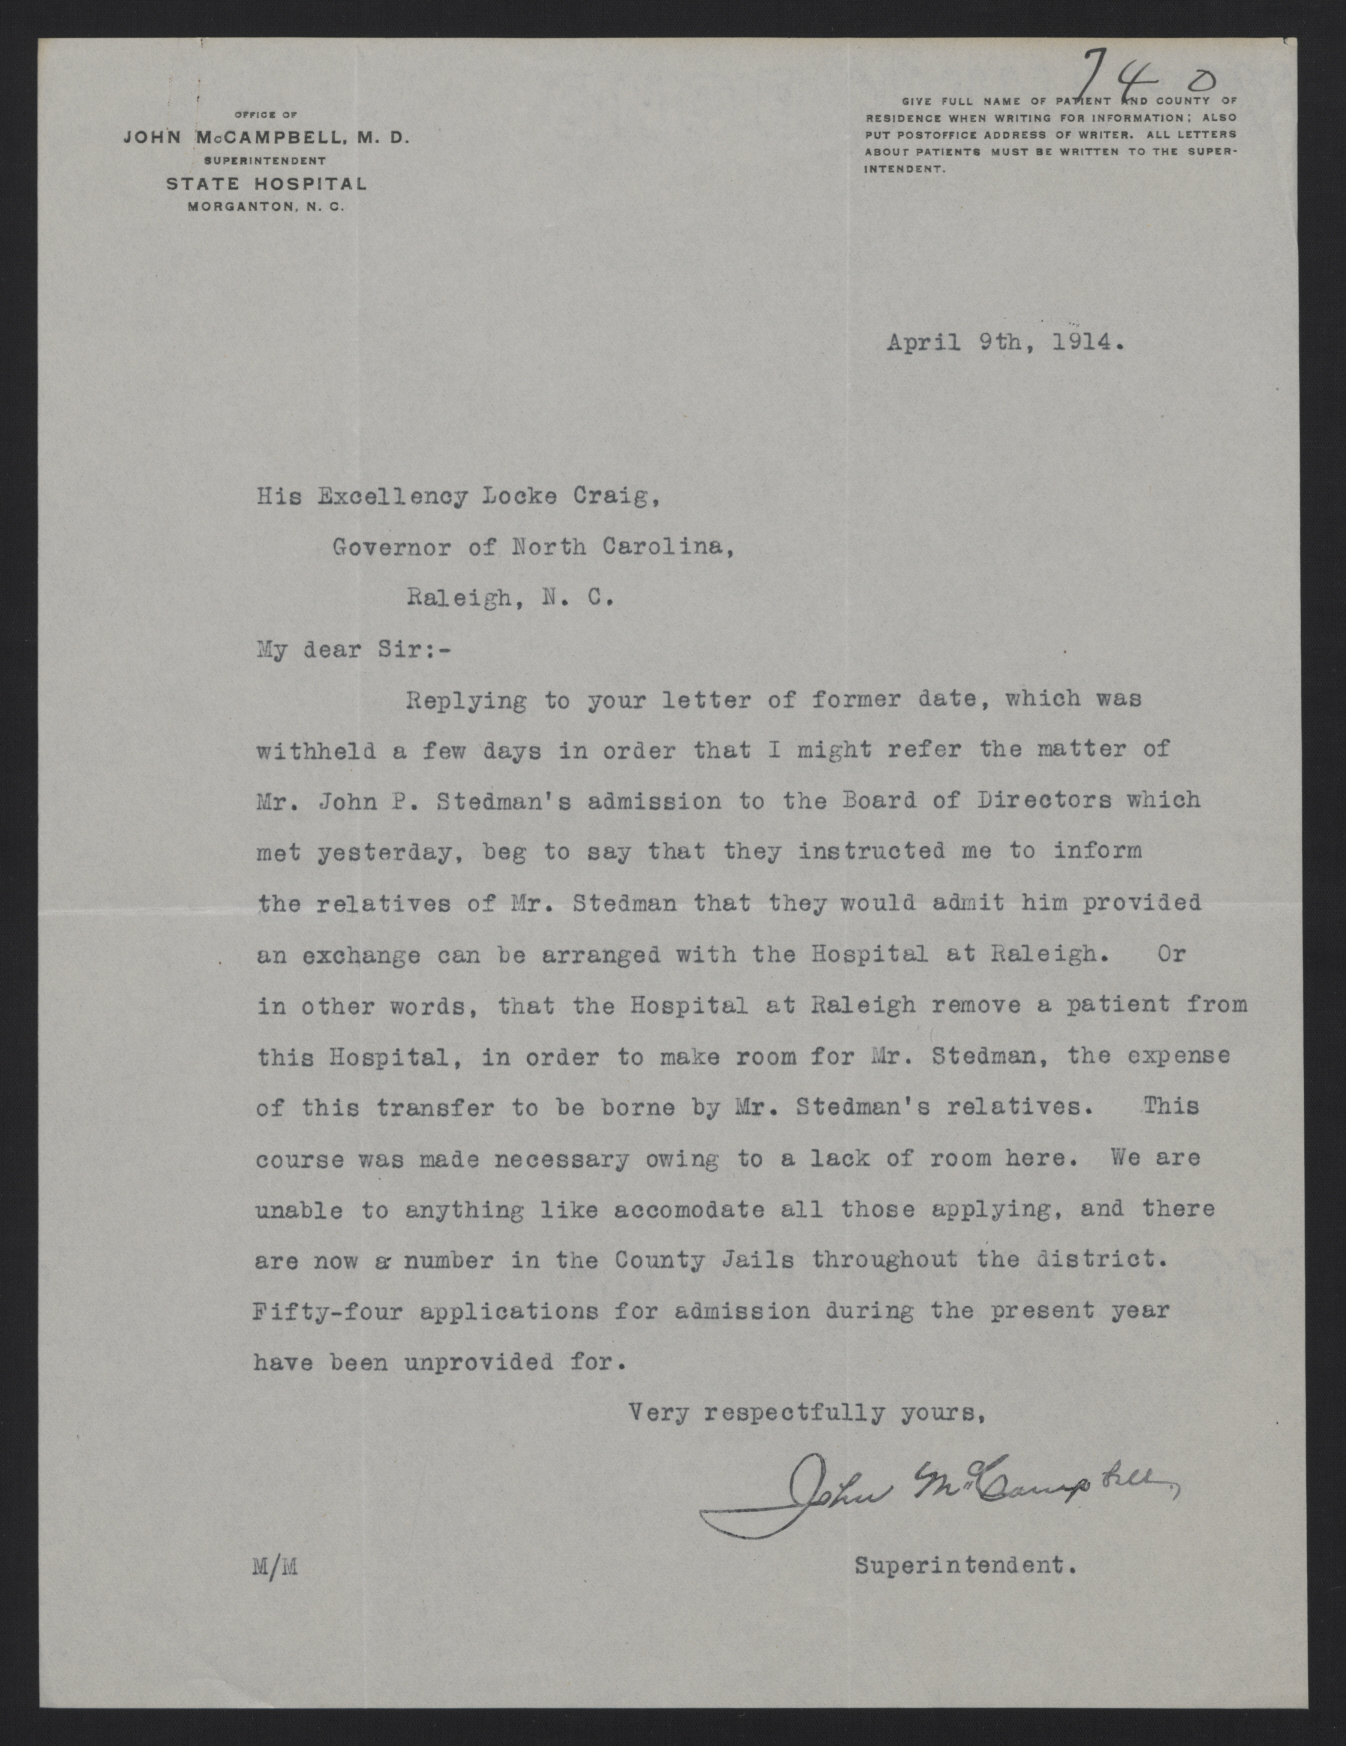 Letter from McCampbell to Craig, April 9, 1914